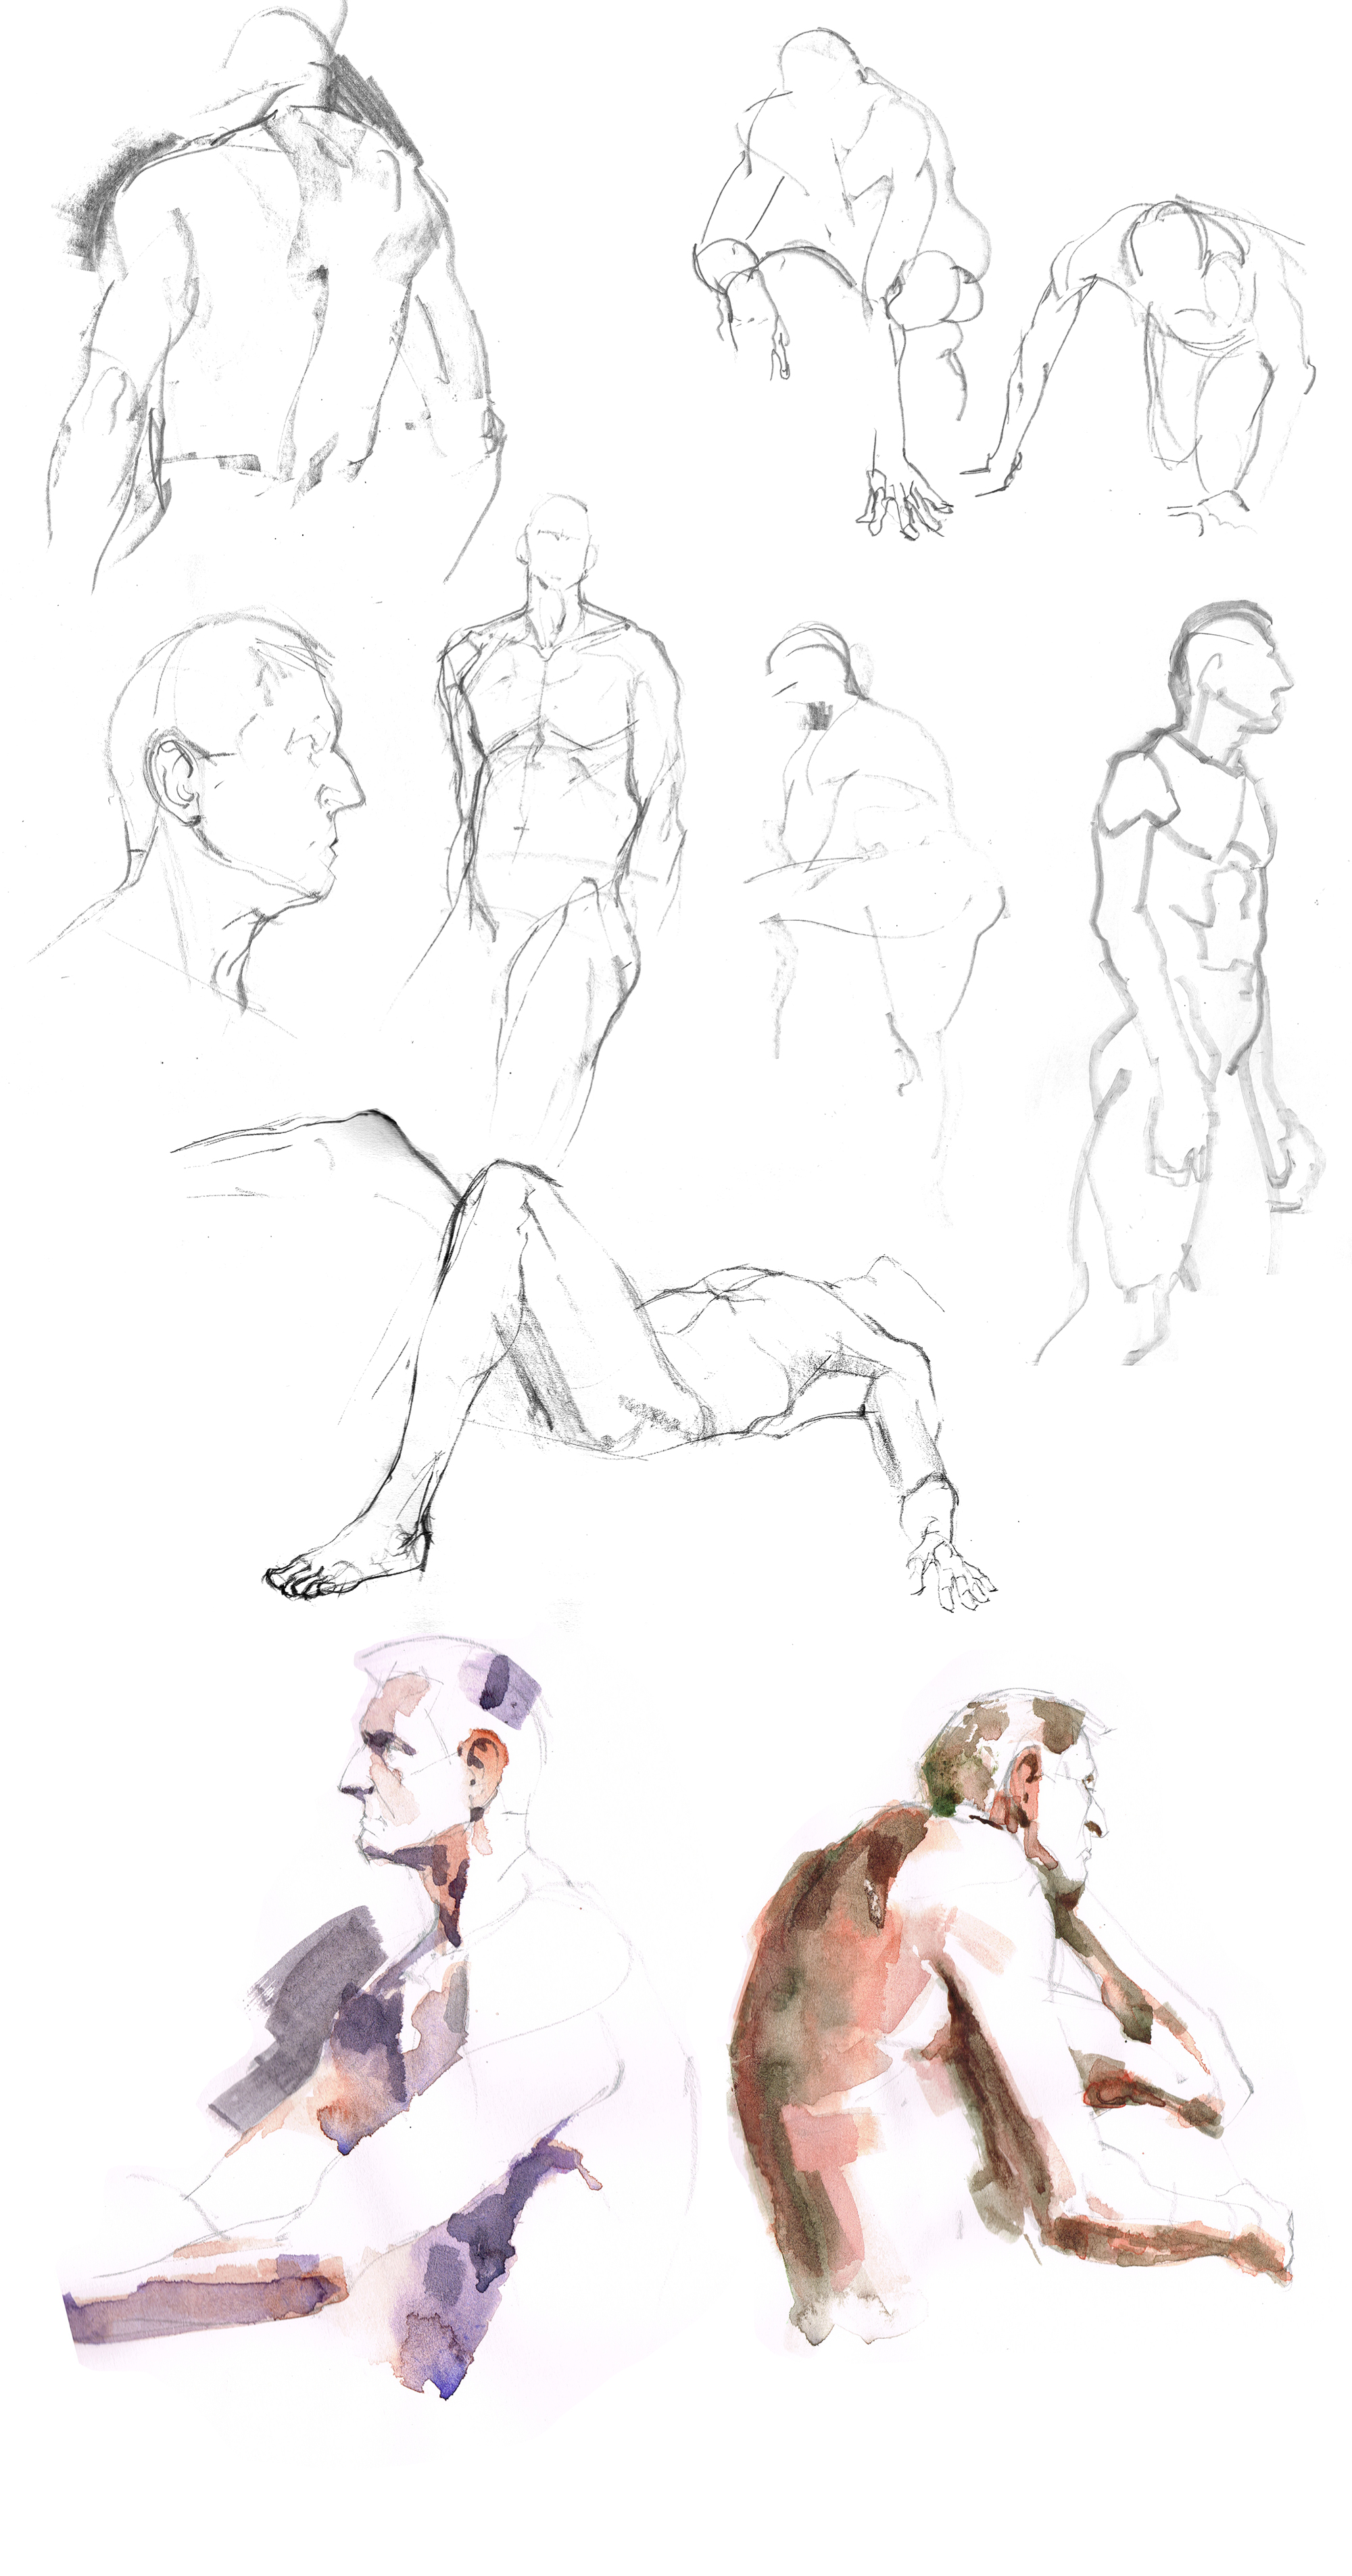 Amazon.com: Poses for Artists Volume 2 - Standing Poses: An essential  reference for figure drawing and the human form (Inspiring Art and  Artists): 9781530604111: Martin, Justin R: Books